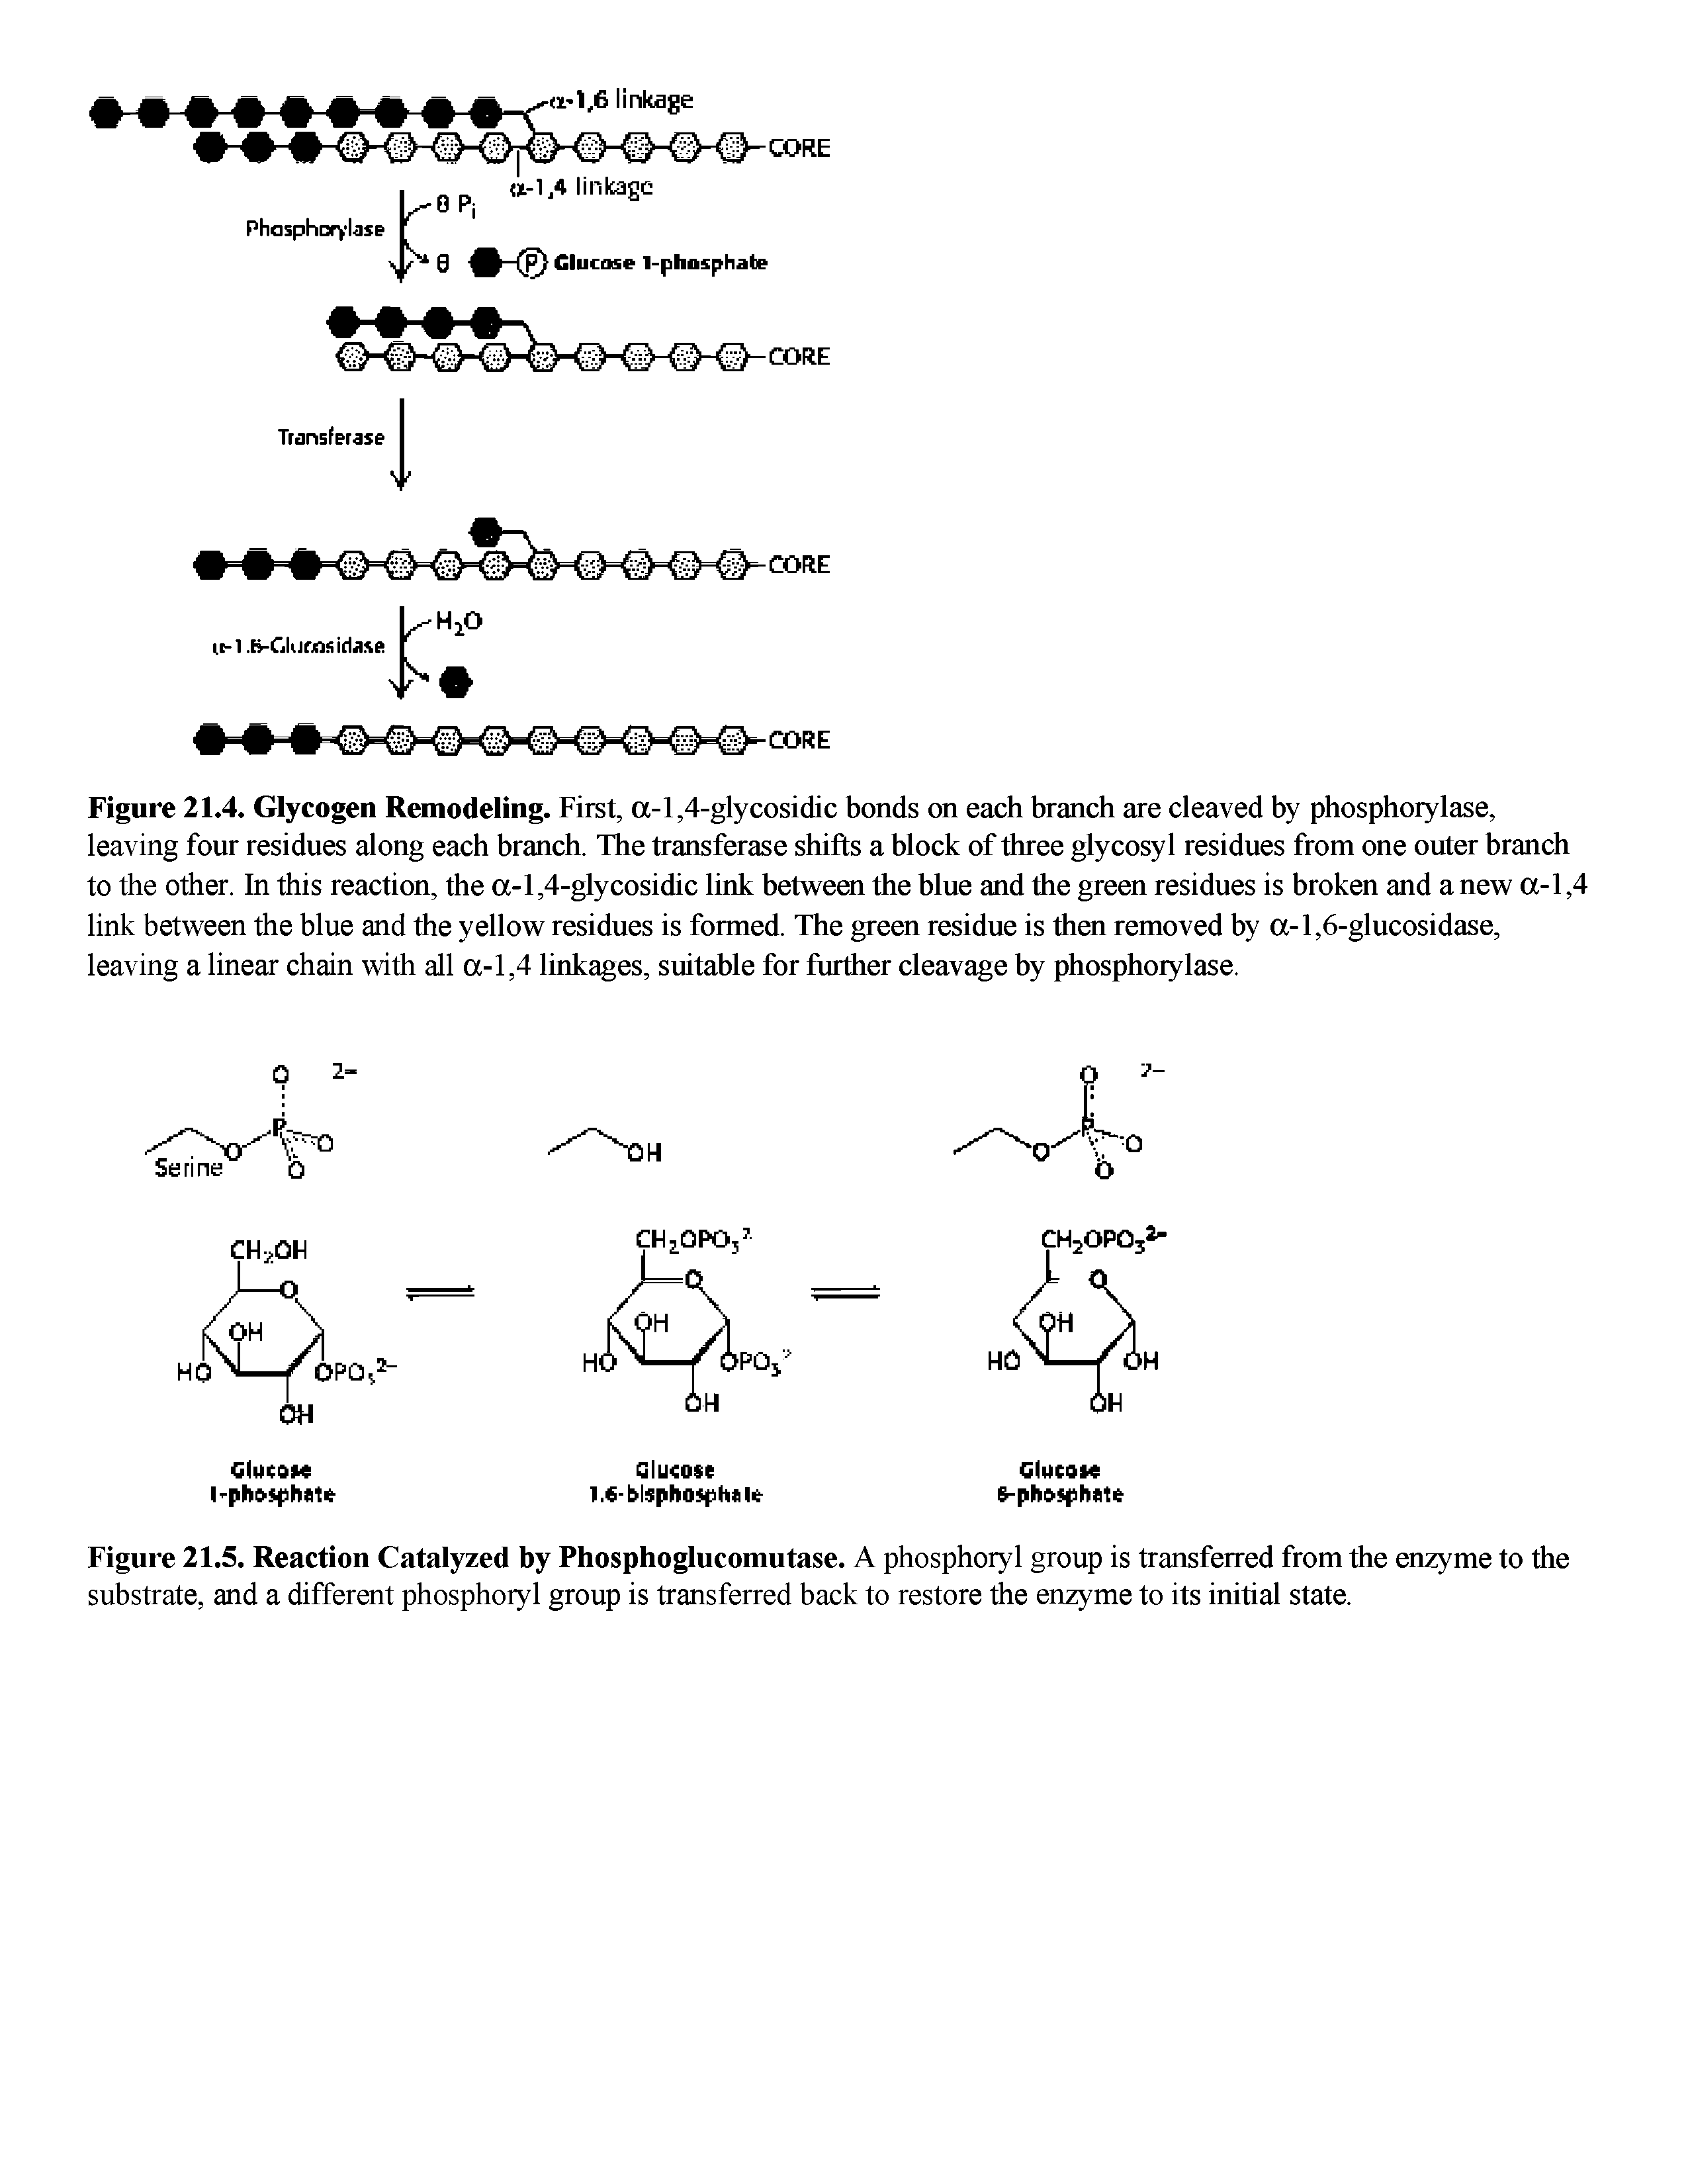 Figure 21.5. Reaction Catalyzed by Phosphoglucomutase. A phosphoryl group is transferred from the enzyme to the substrate, and a different phosphoryl group is transferred hack to restore the enzyme to its initial state.